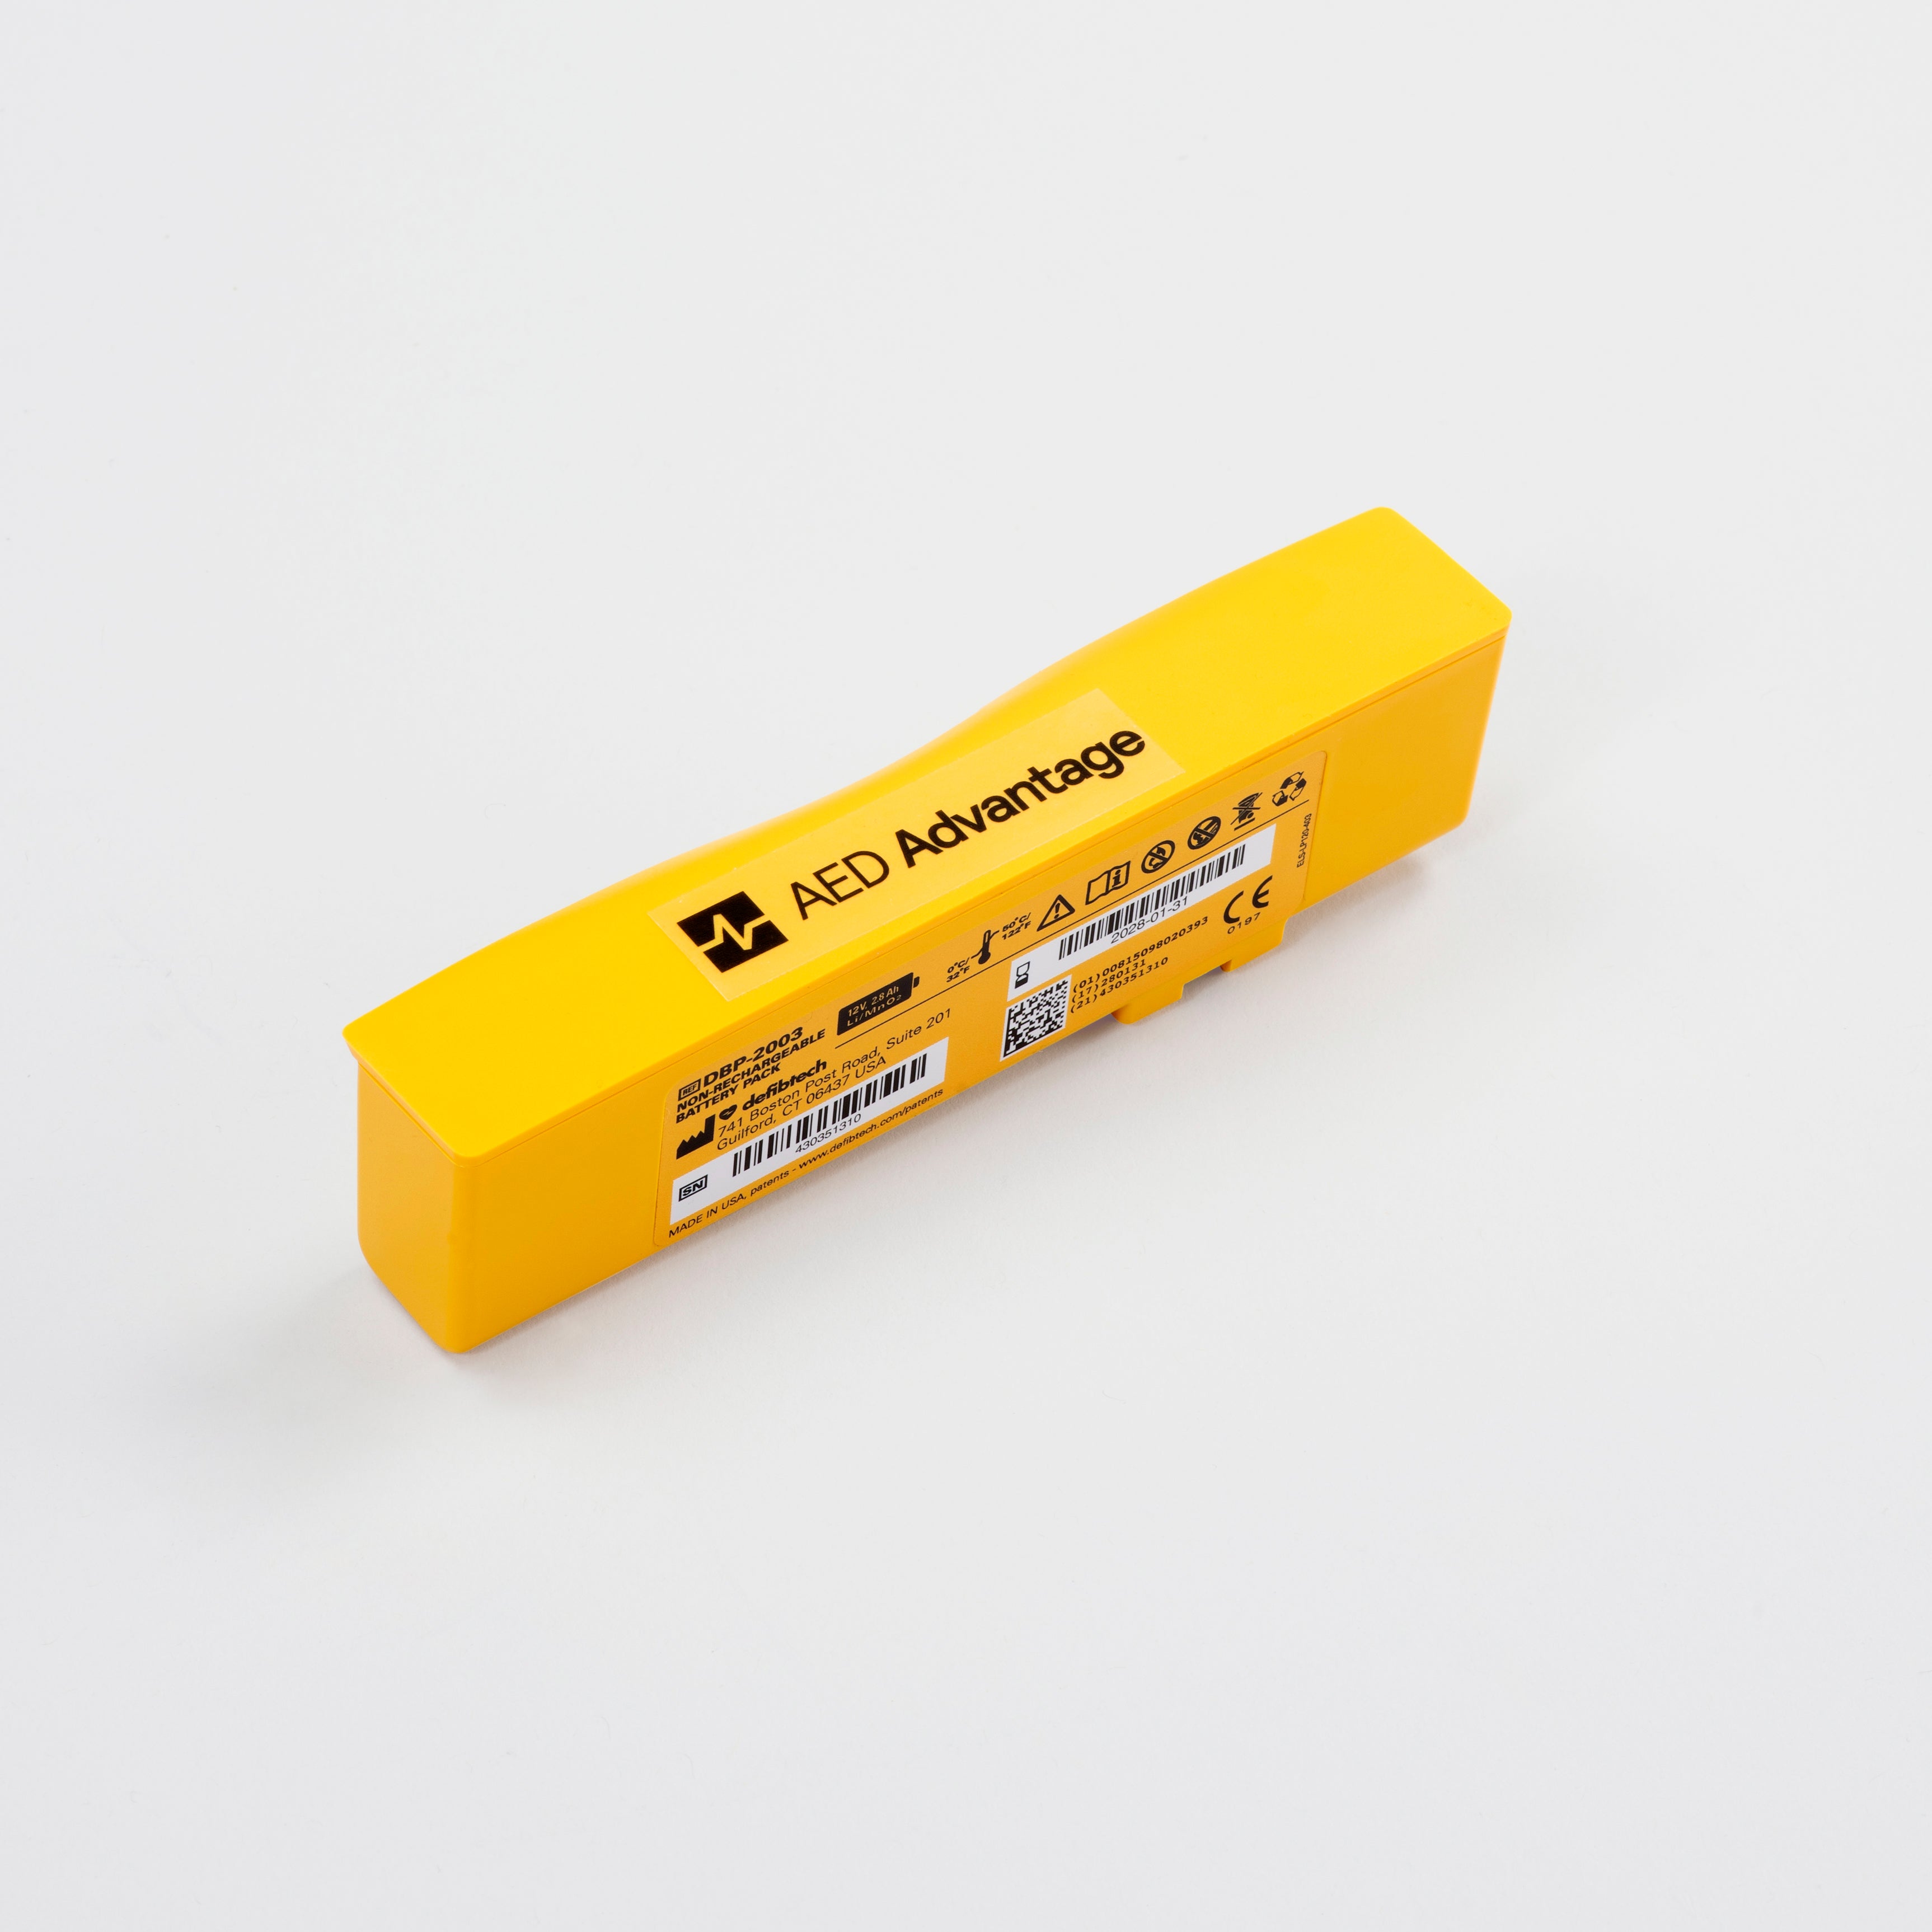 A small yellow rectangular Defibtech Lifeline VIEW AED battery pack